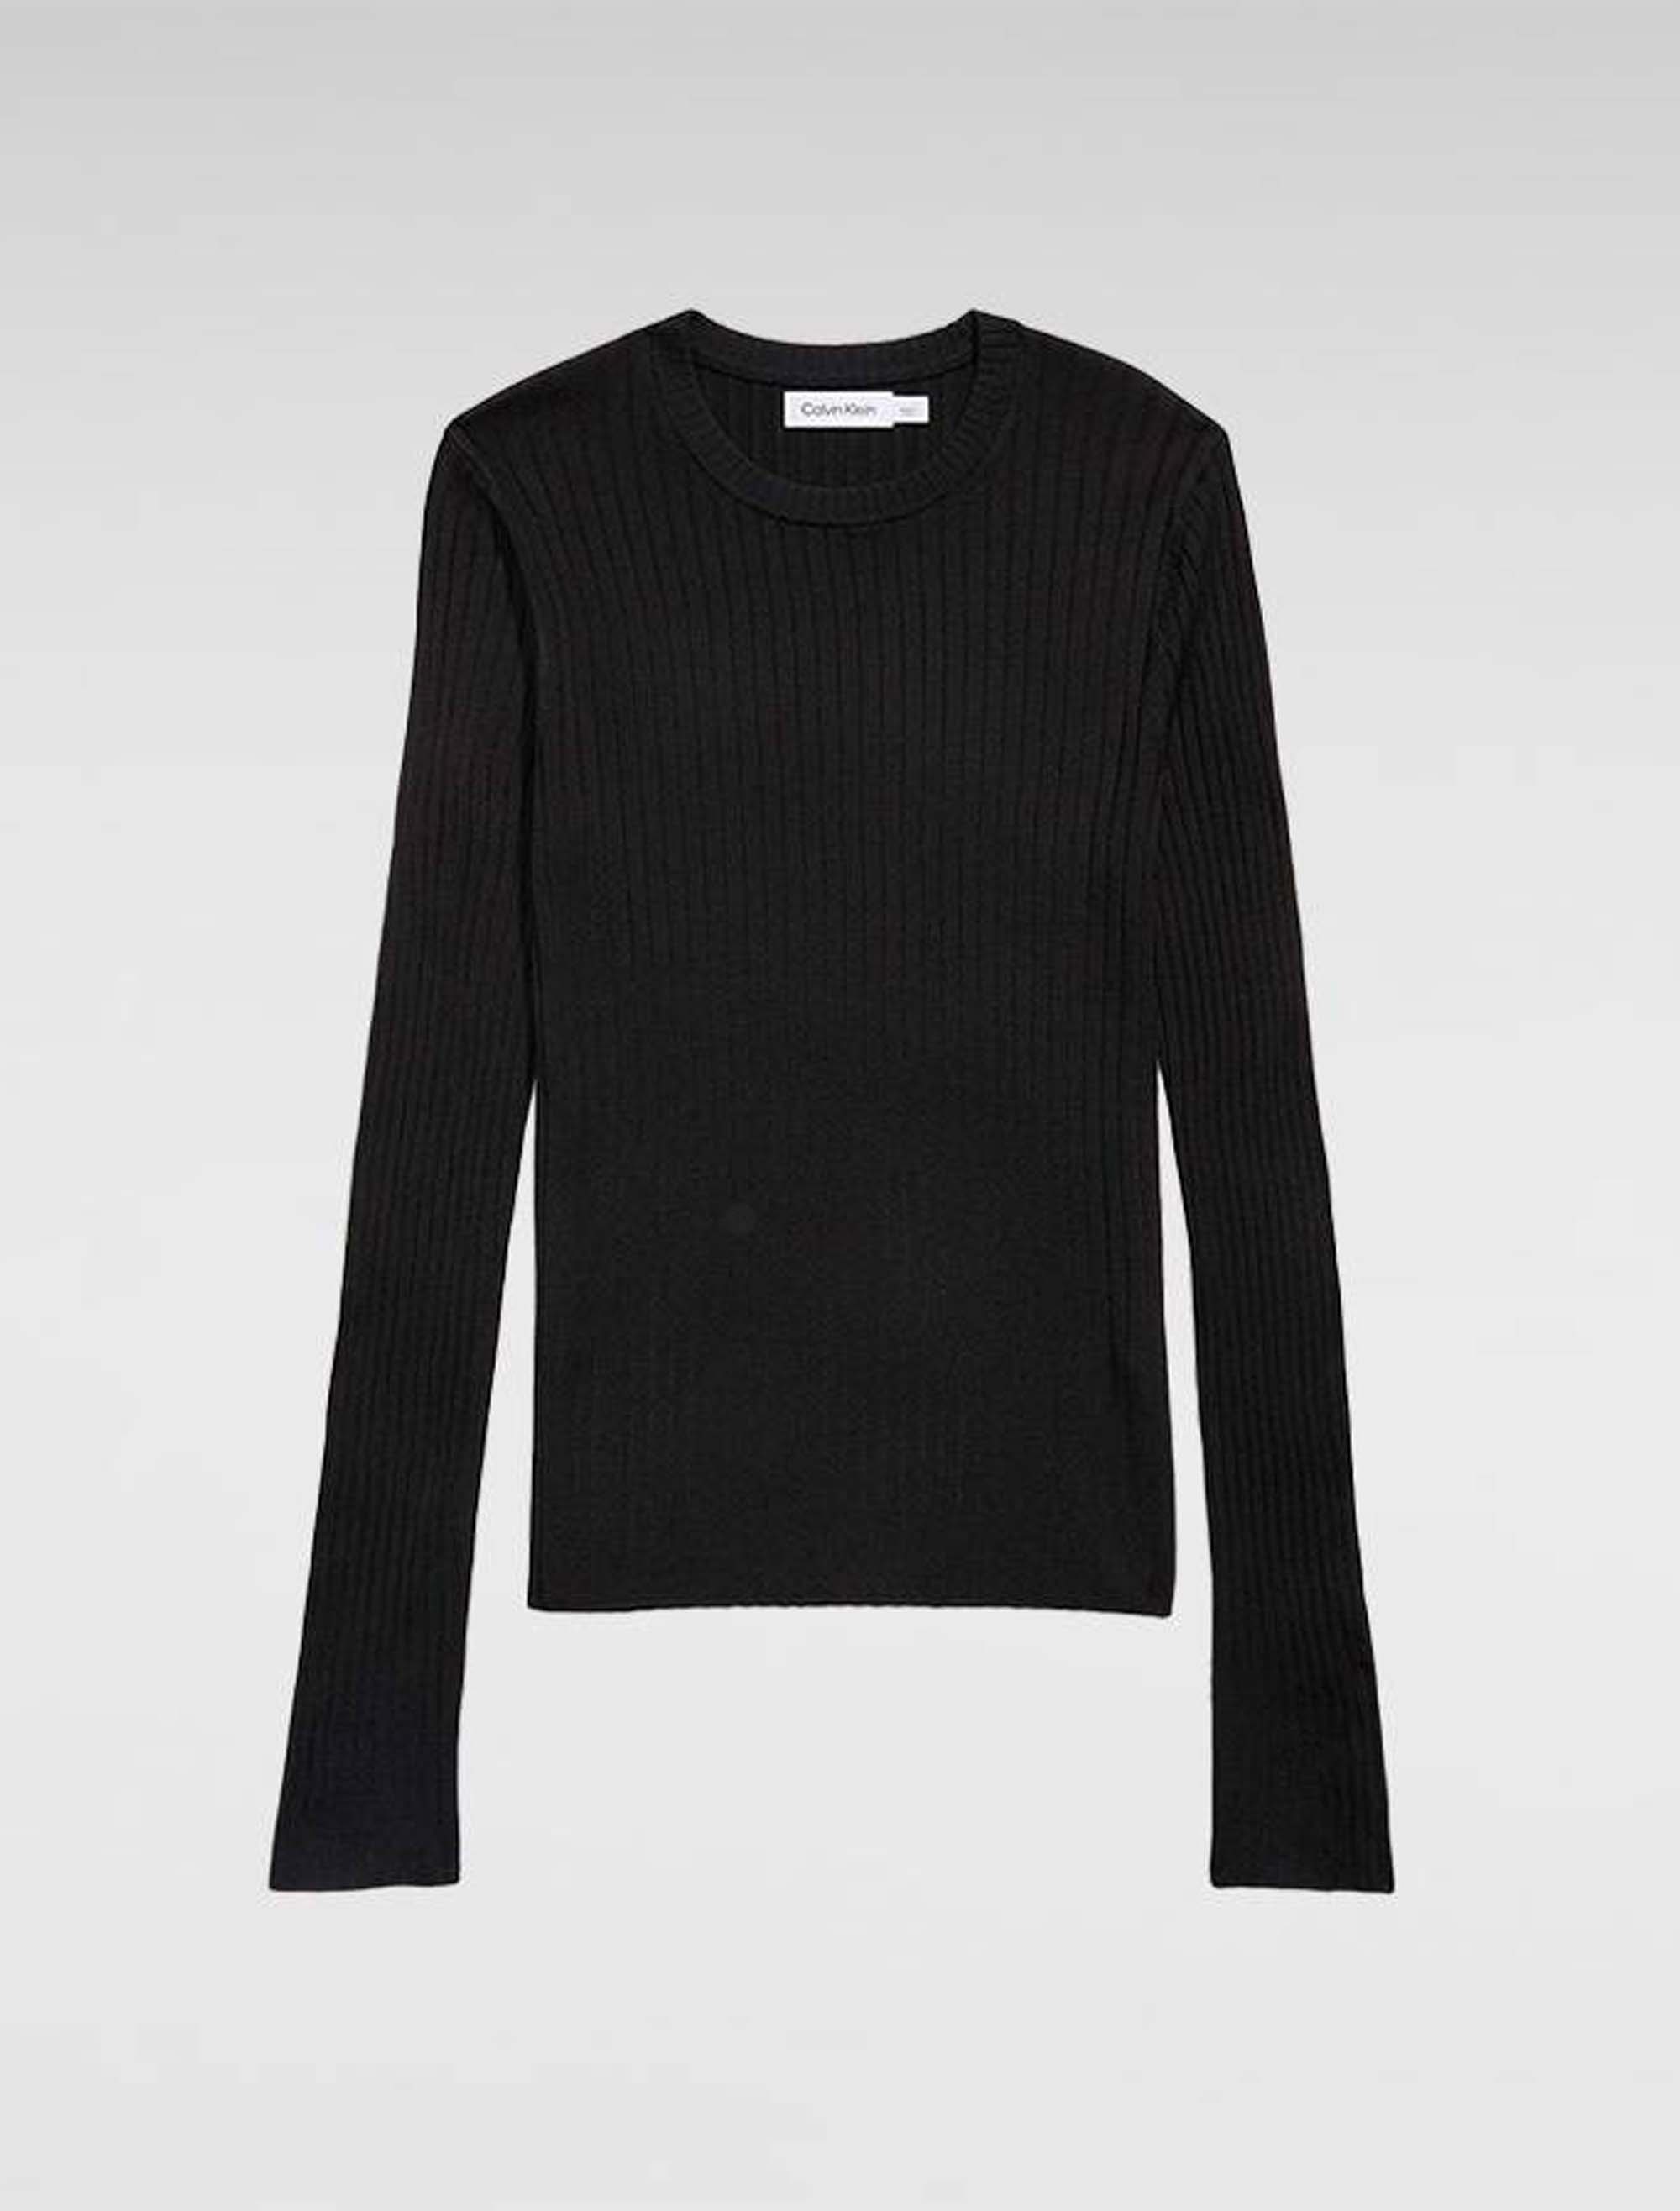 16 Chic Gifts to Buy This Season at Calvin Klein | Who What Wear